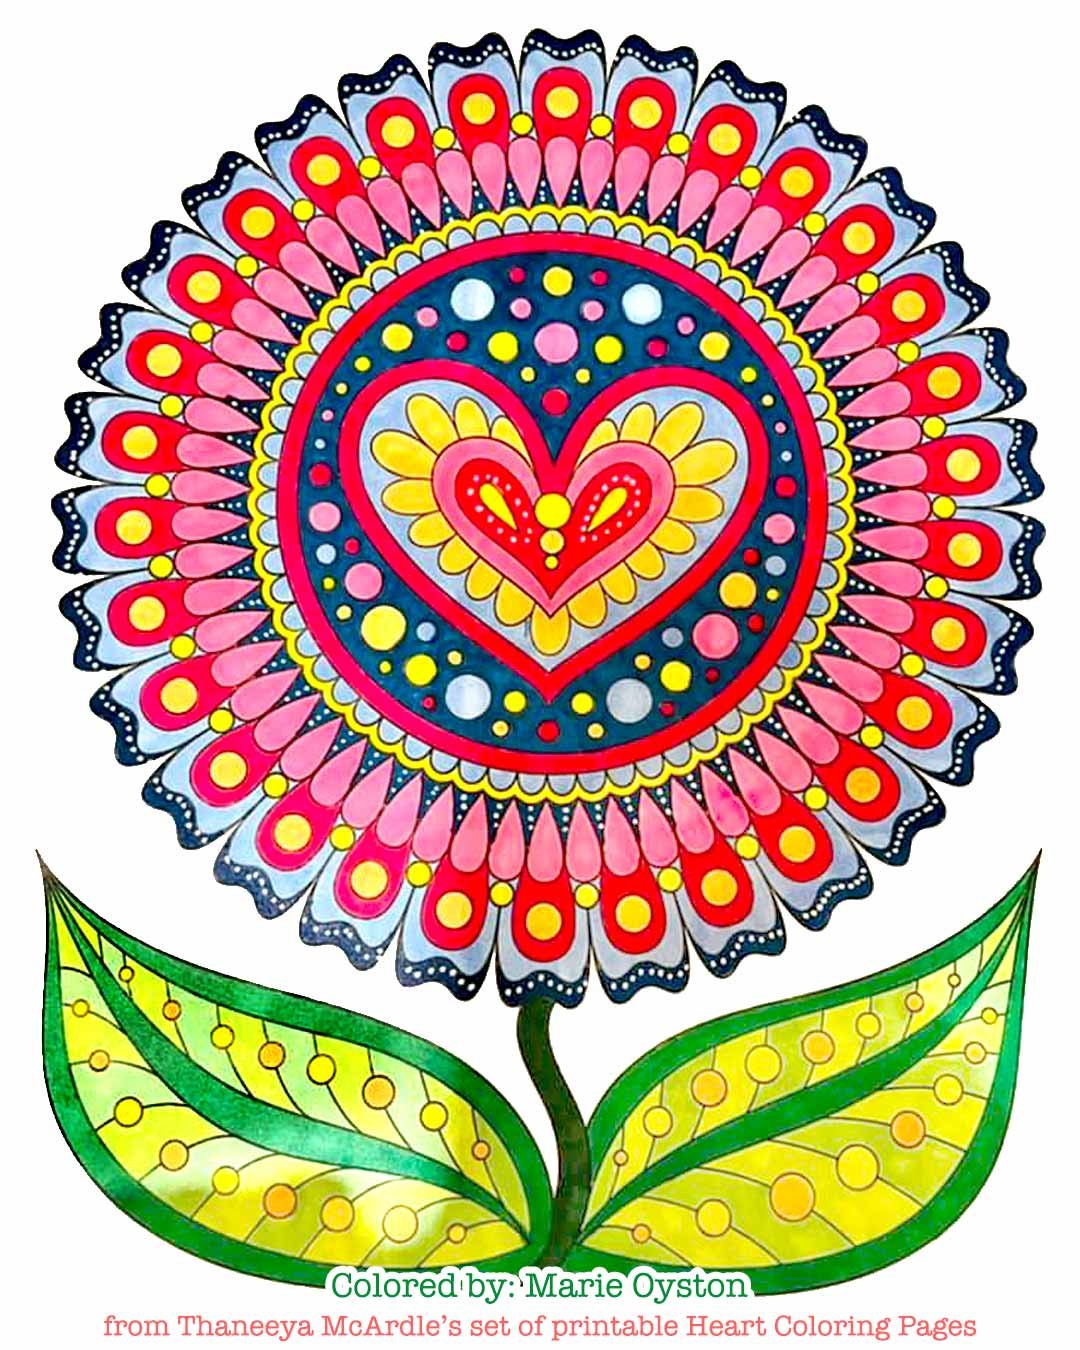 Heart Flower Coloring Page from Thaneeya McArdle's Set of 10 Printable Heart Coloring Pages